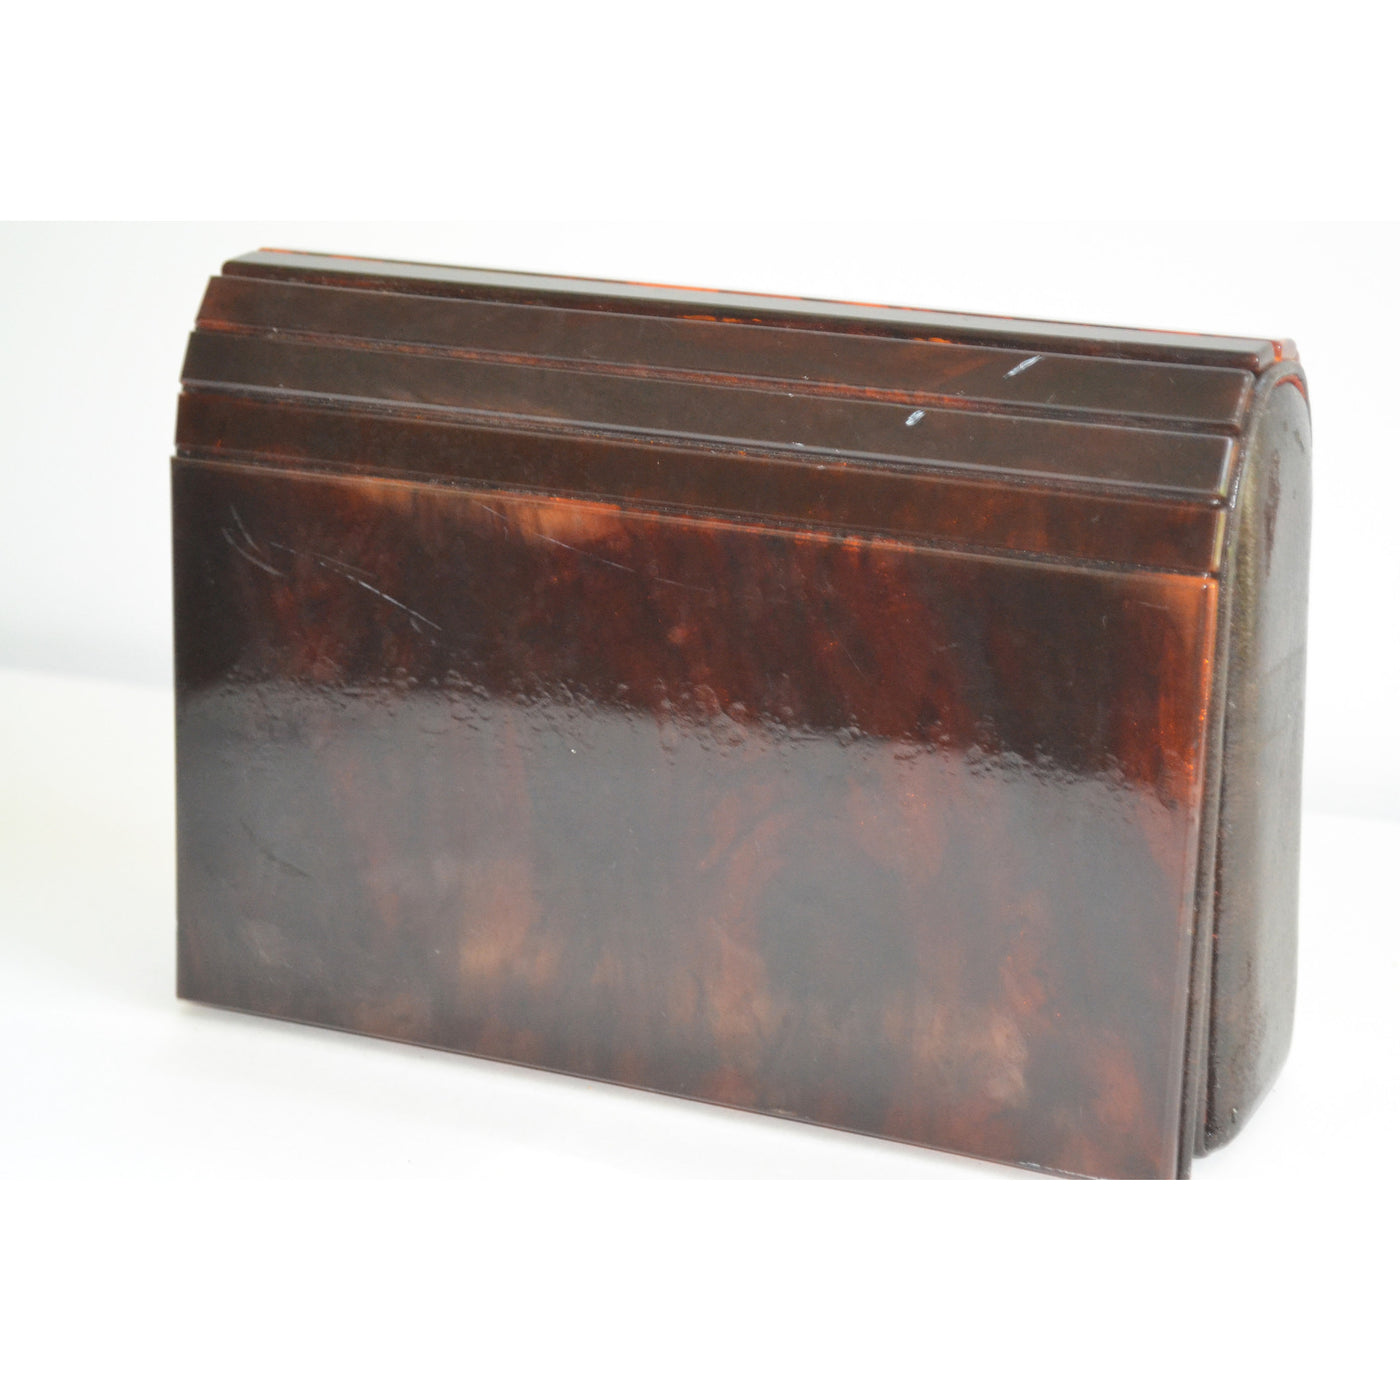 Vintage Brown Lucite Clutch Purse By Delill